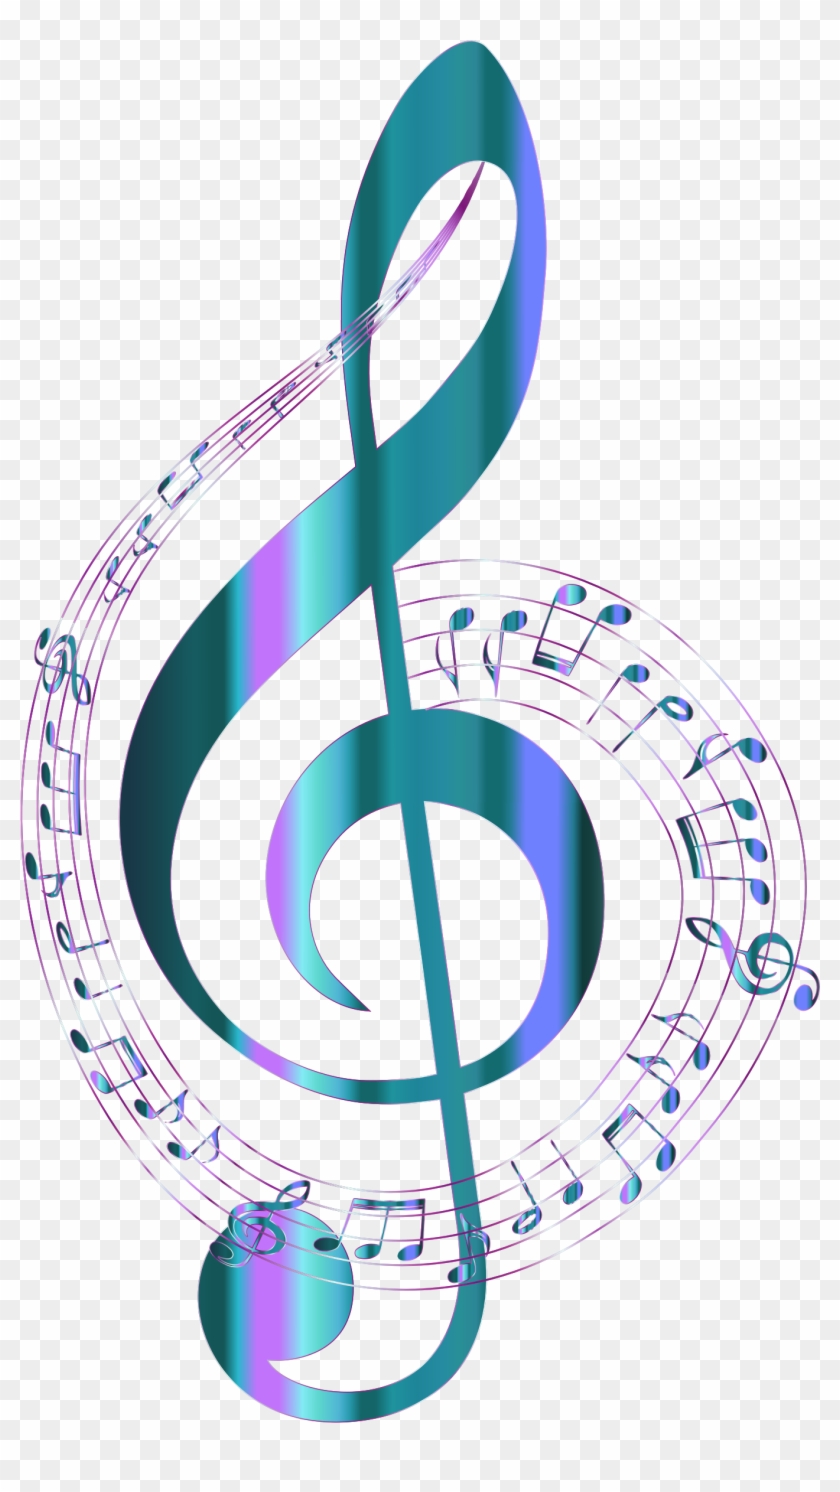 Turquoise Musical Notes Typography No Background By - Music Notes No Background #371873